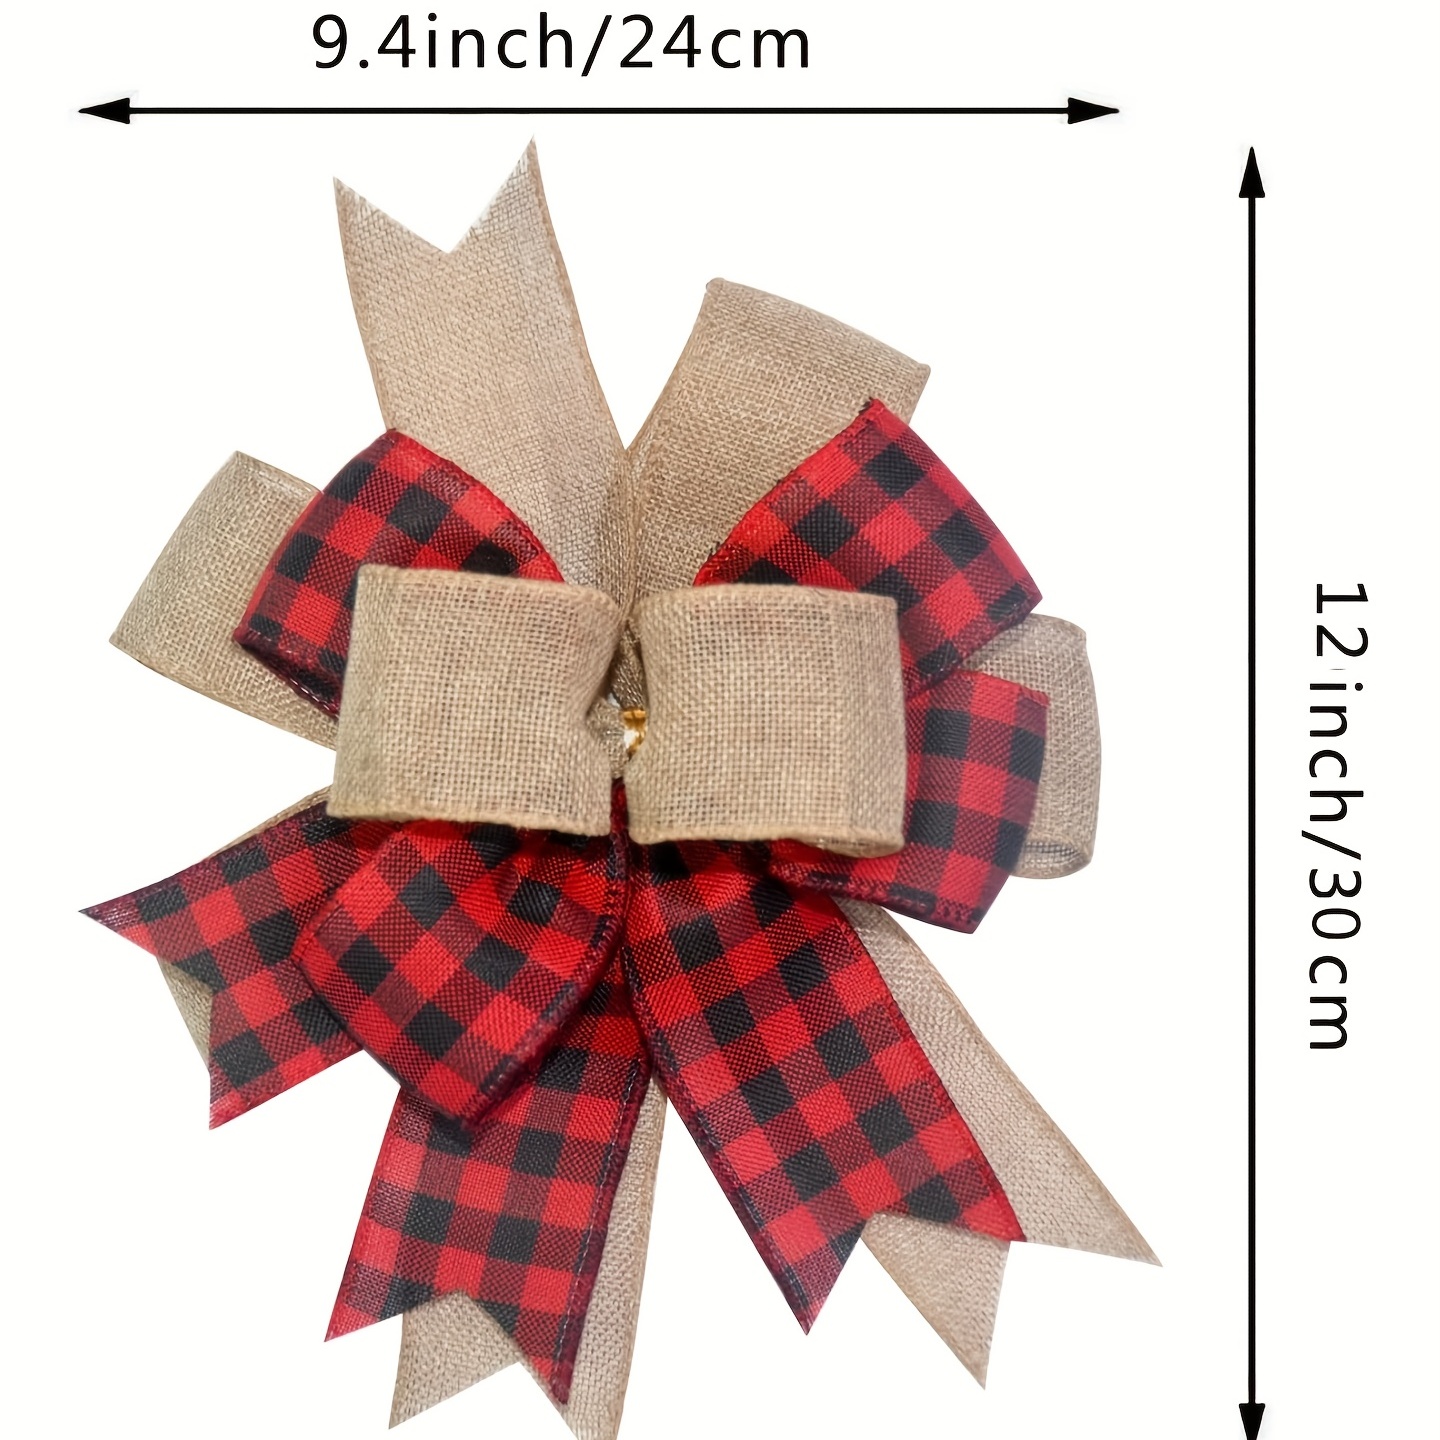 Black White Plaid Gift Bows Burlap Wreaths Bows Christmas Tree Topper for  Wedding Holiday Birthday Party Decoration 12 x 9.4